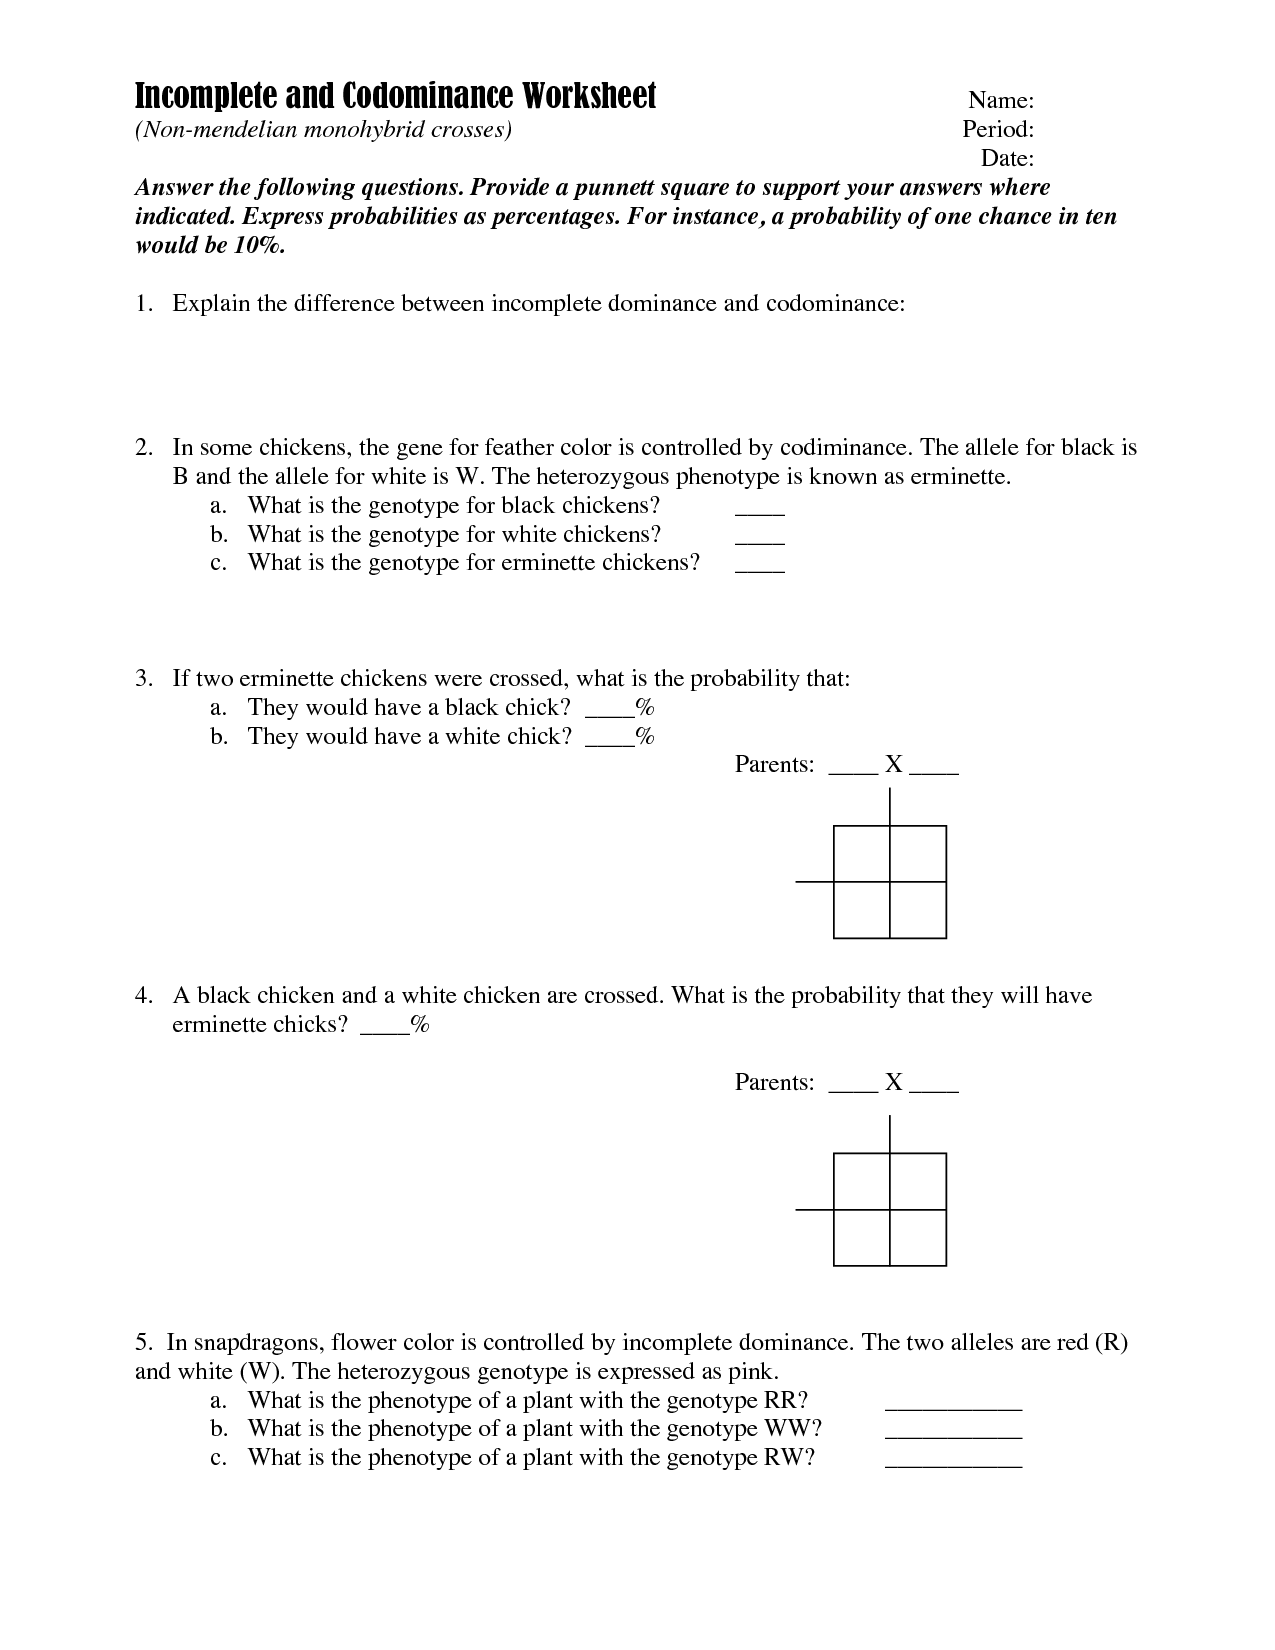 Biology Incomplete And Codominance Worksheet Answers